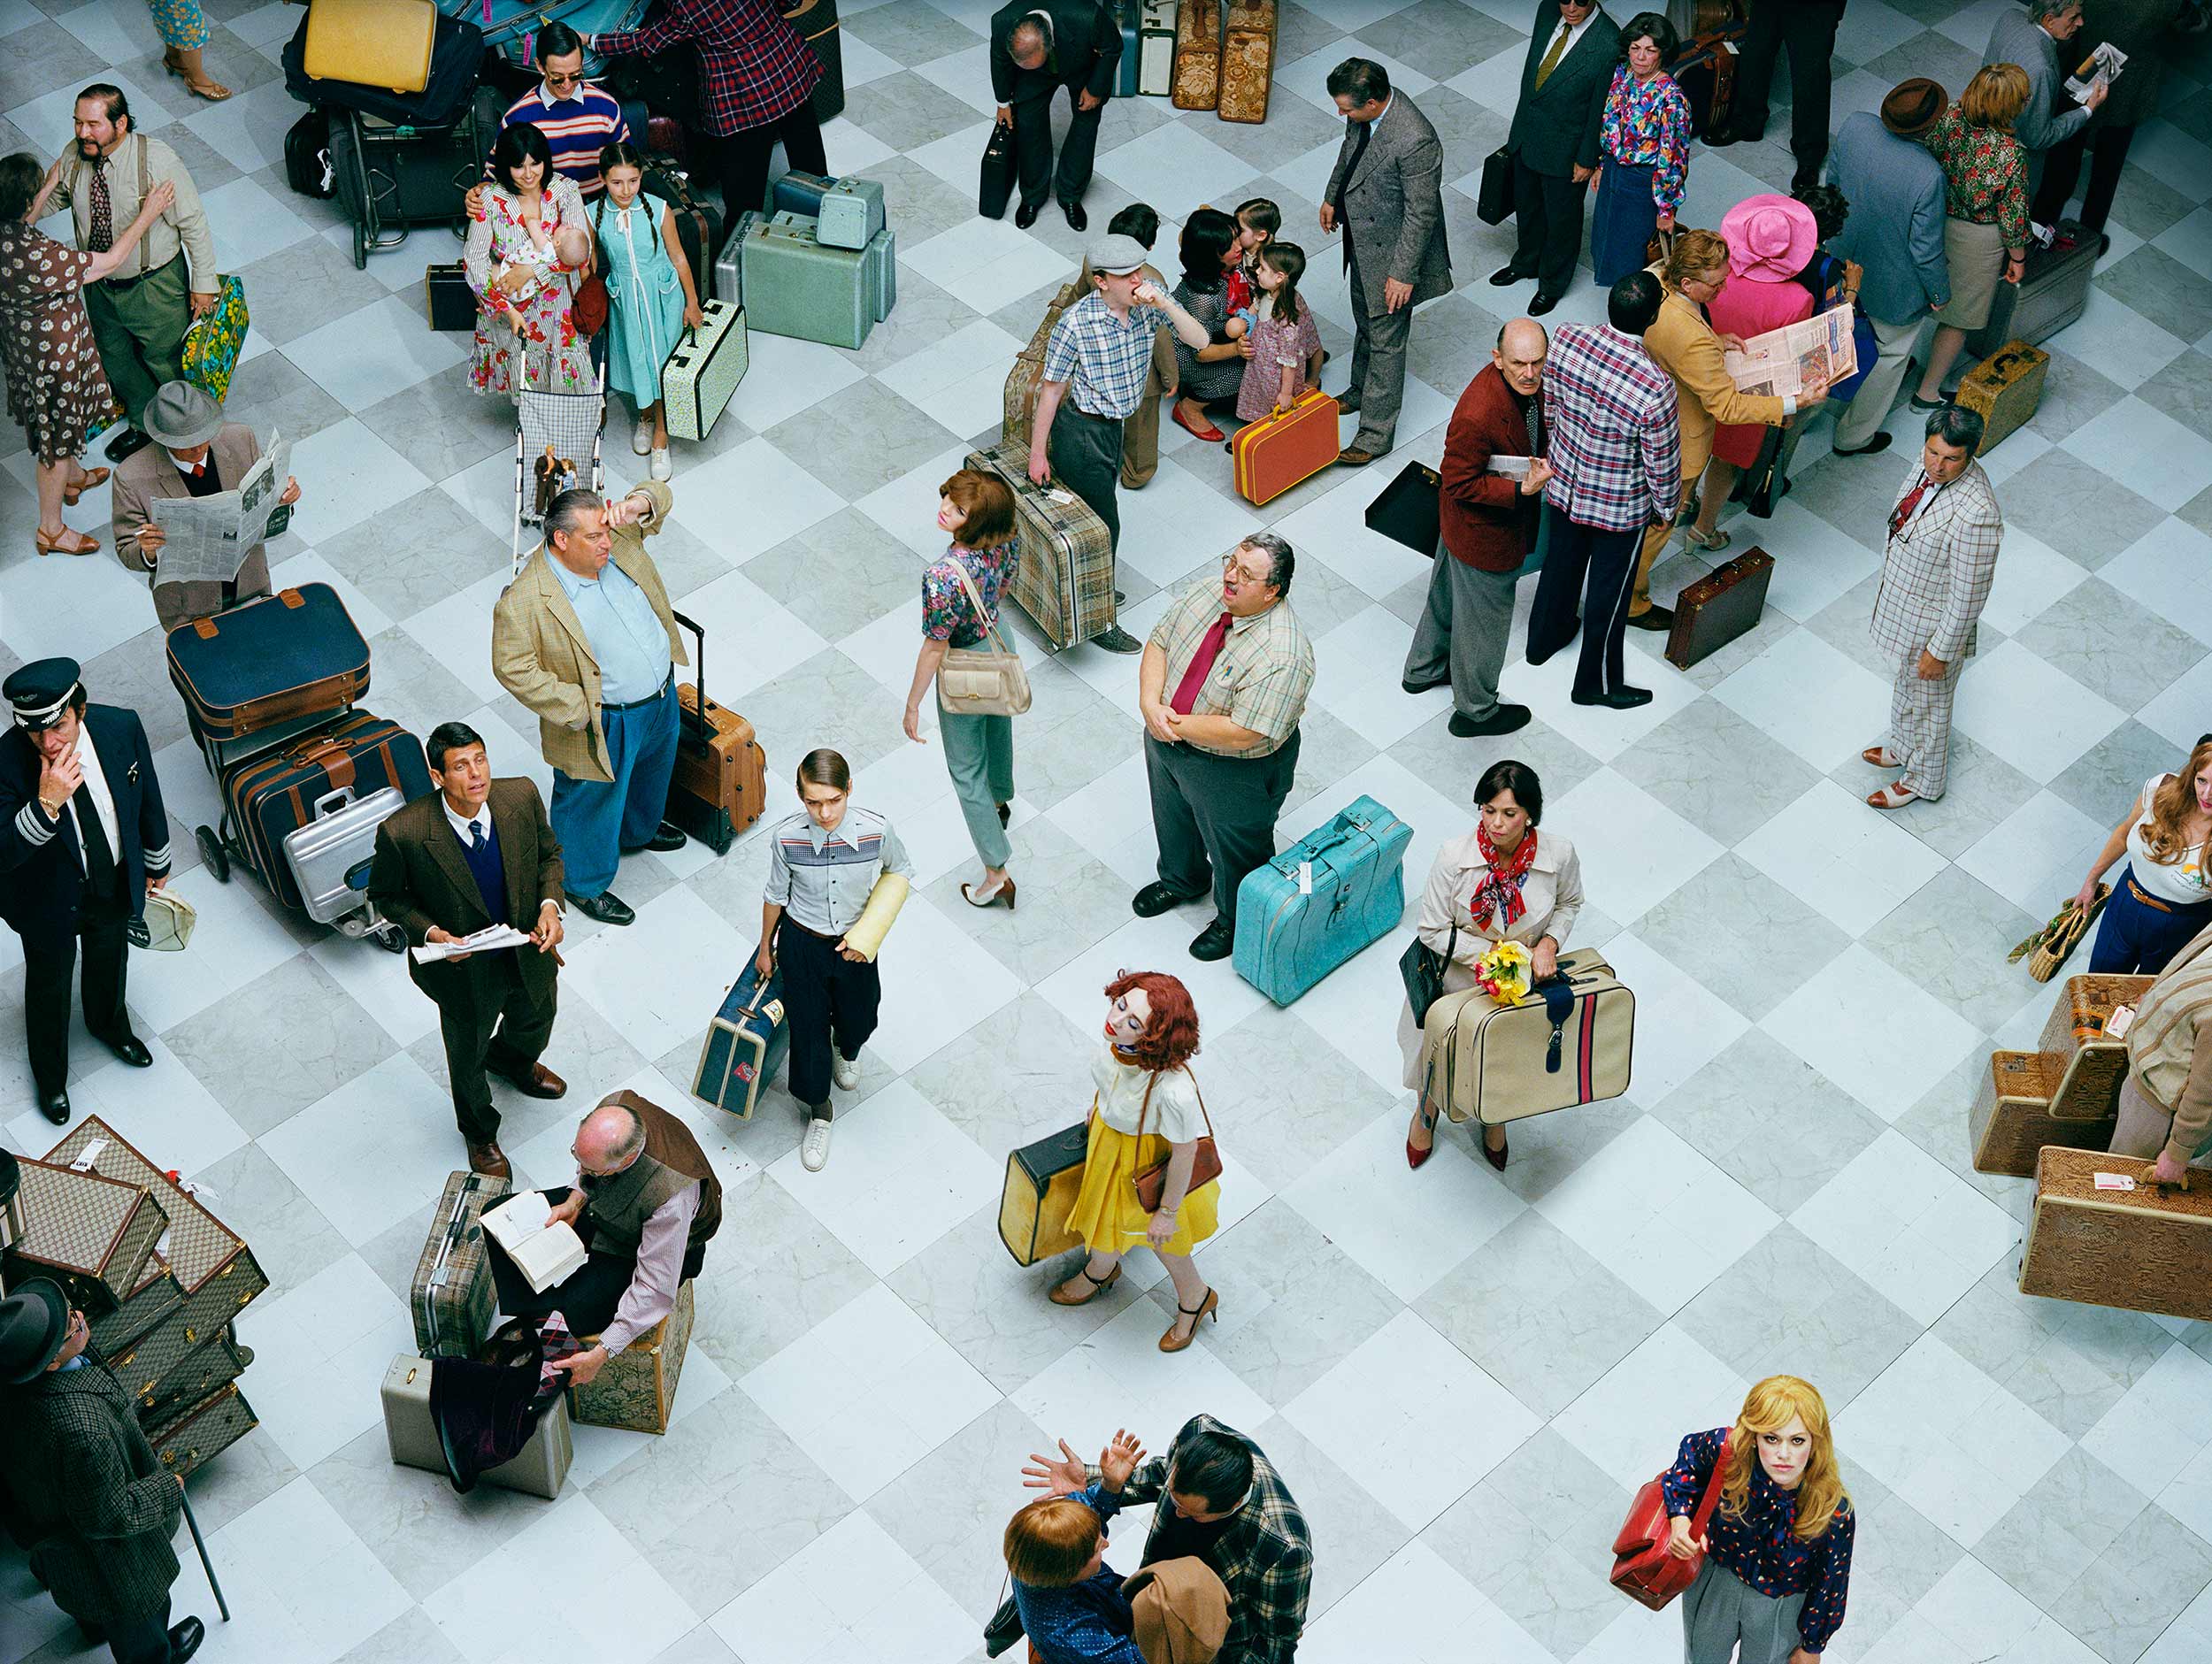   Face In The Crowd   Crowd #7 (Bob Hope Airport),  2013 59.5 x 79 inches 